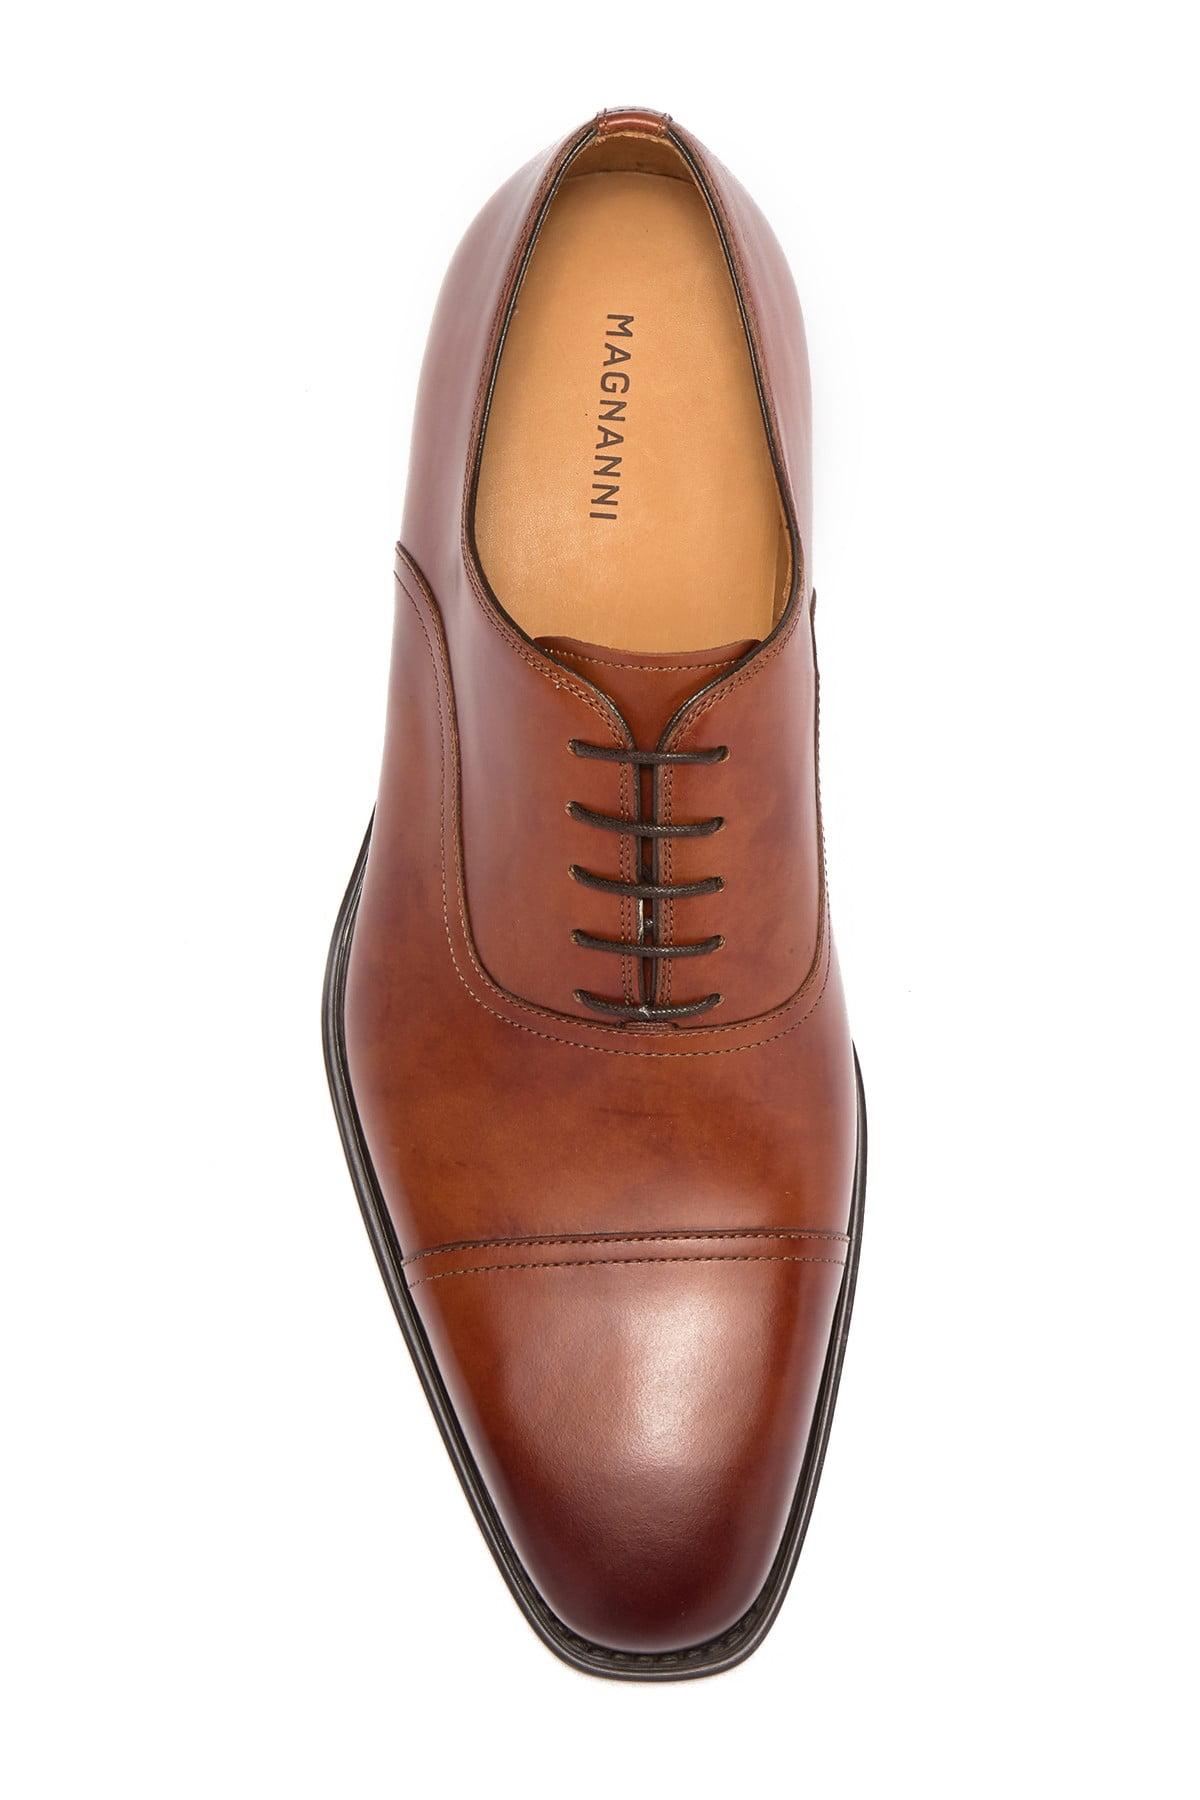 Magnanni Lucas Leather Oxford in Cognac 